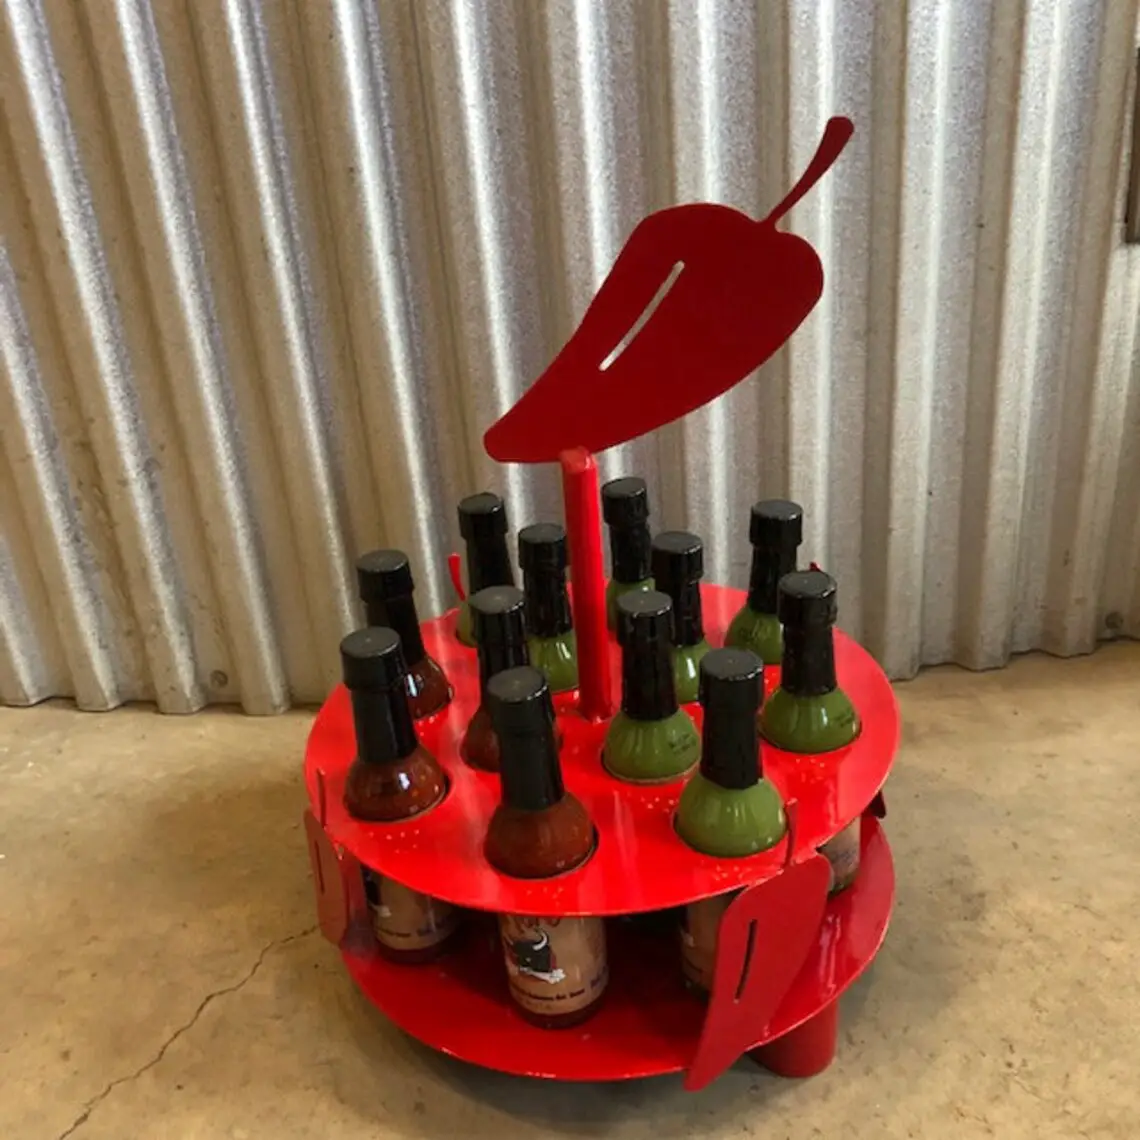 Hot Sauce Display Stand Holds 12 Bottles of Hot Sauce With